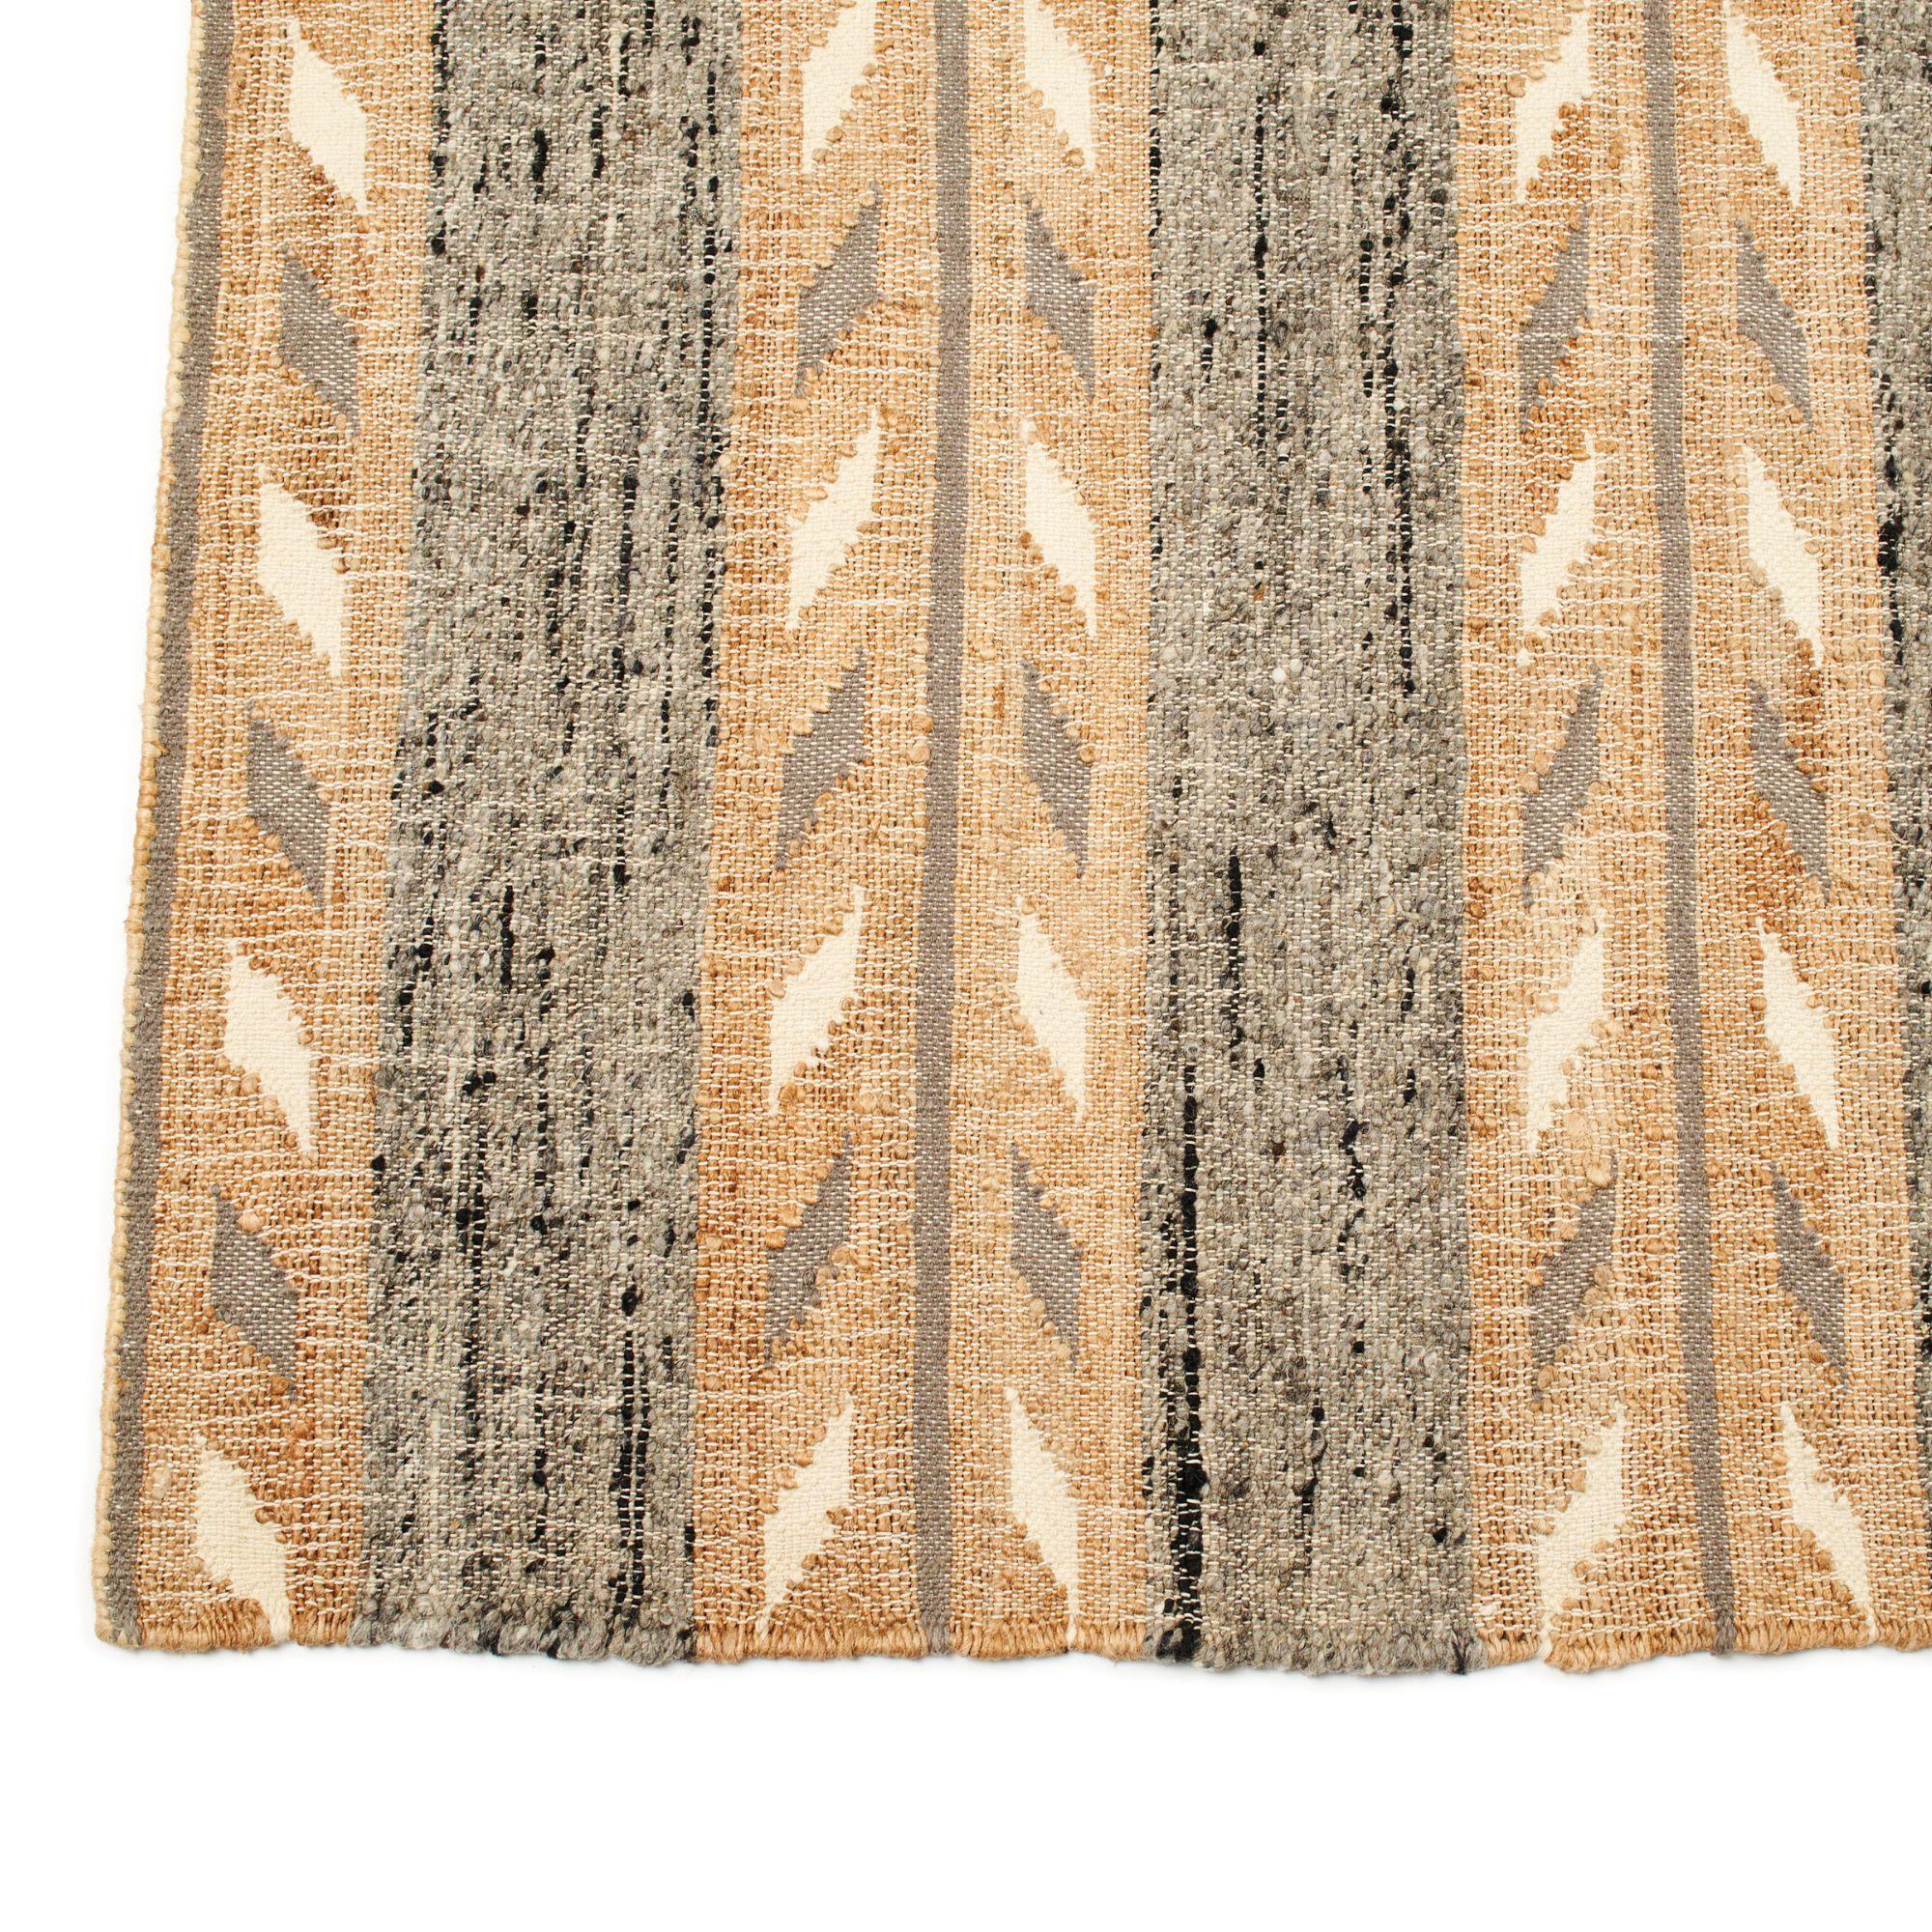 Indian Uneven Arrows Handloom Rug in Natural Shades of Pure Wool, Jute, Cotton For Sale